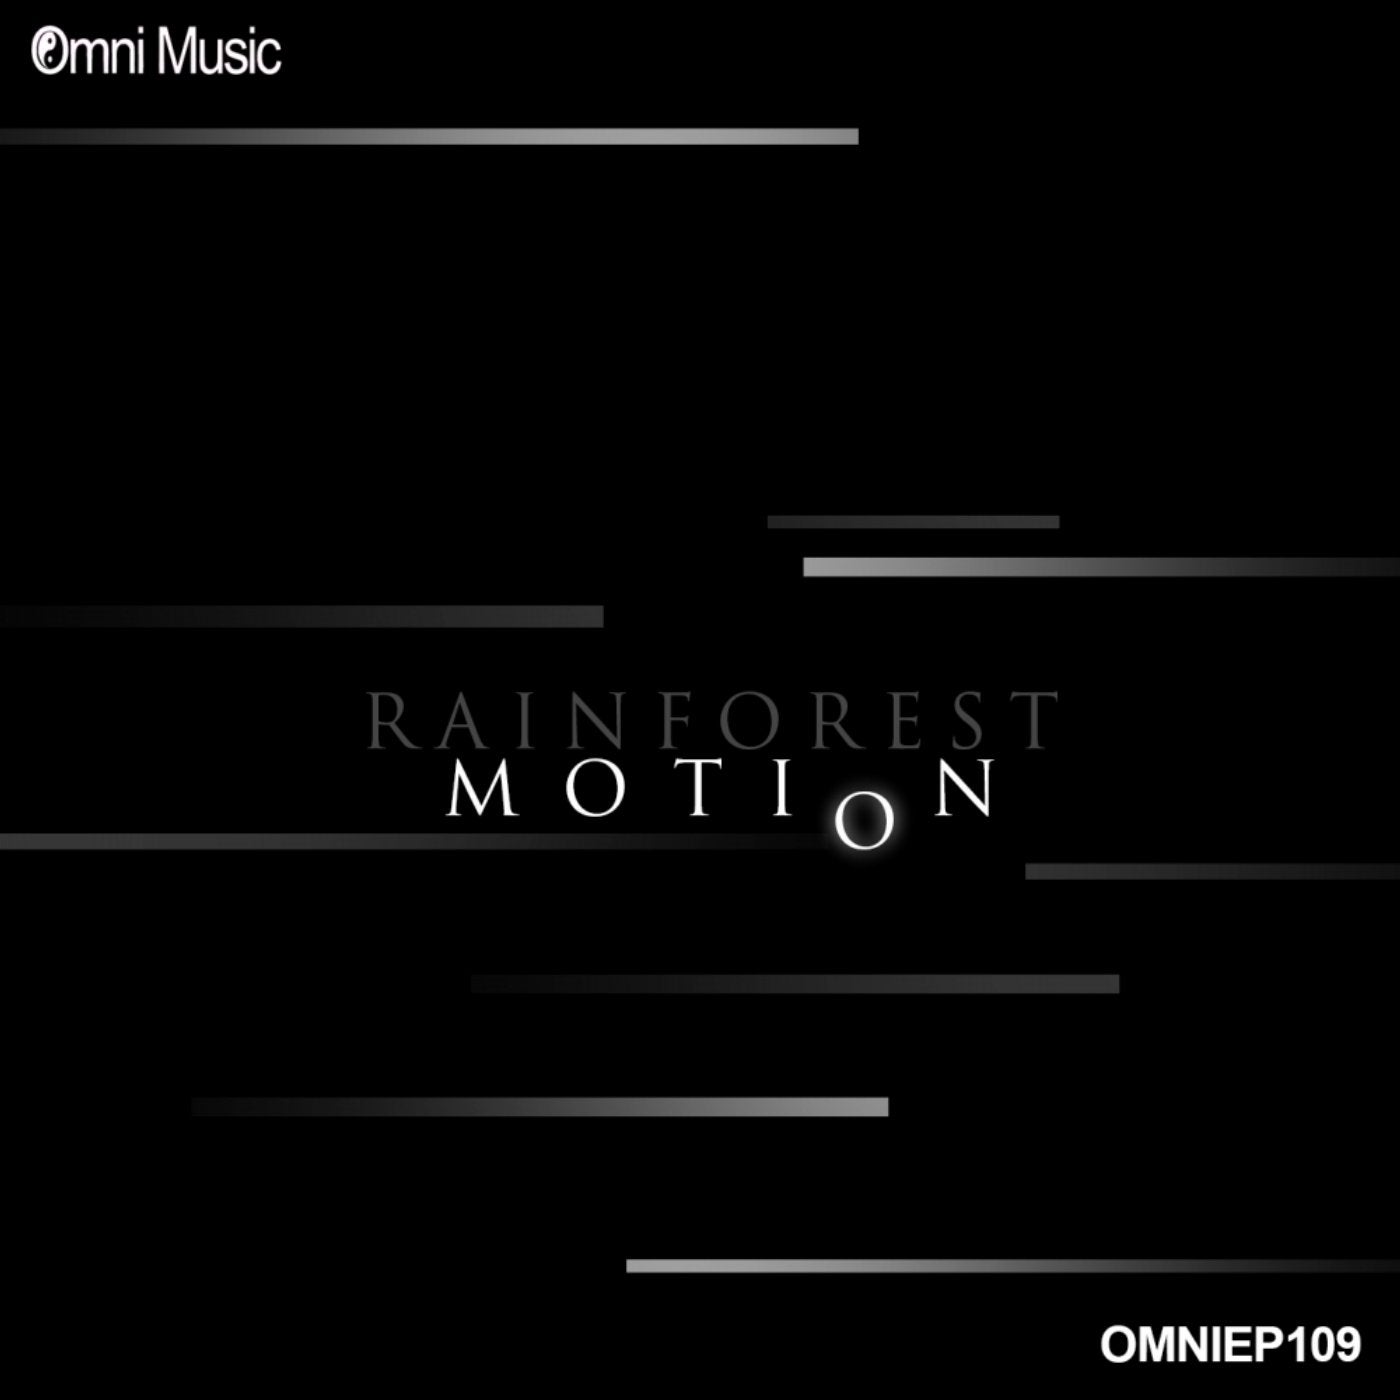 Motion EP